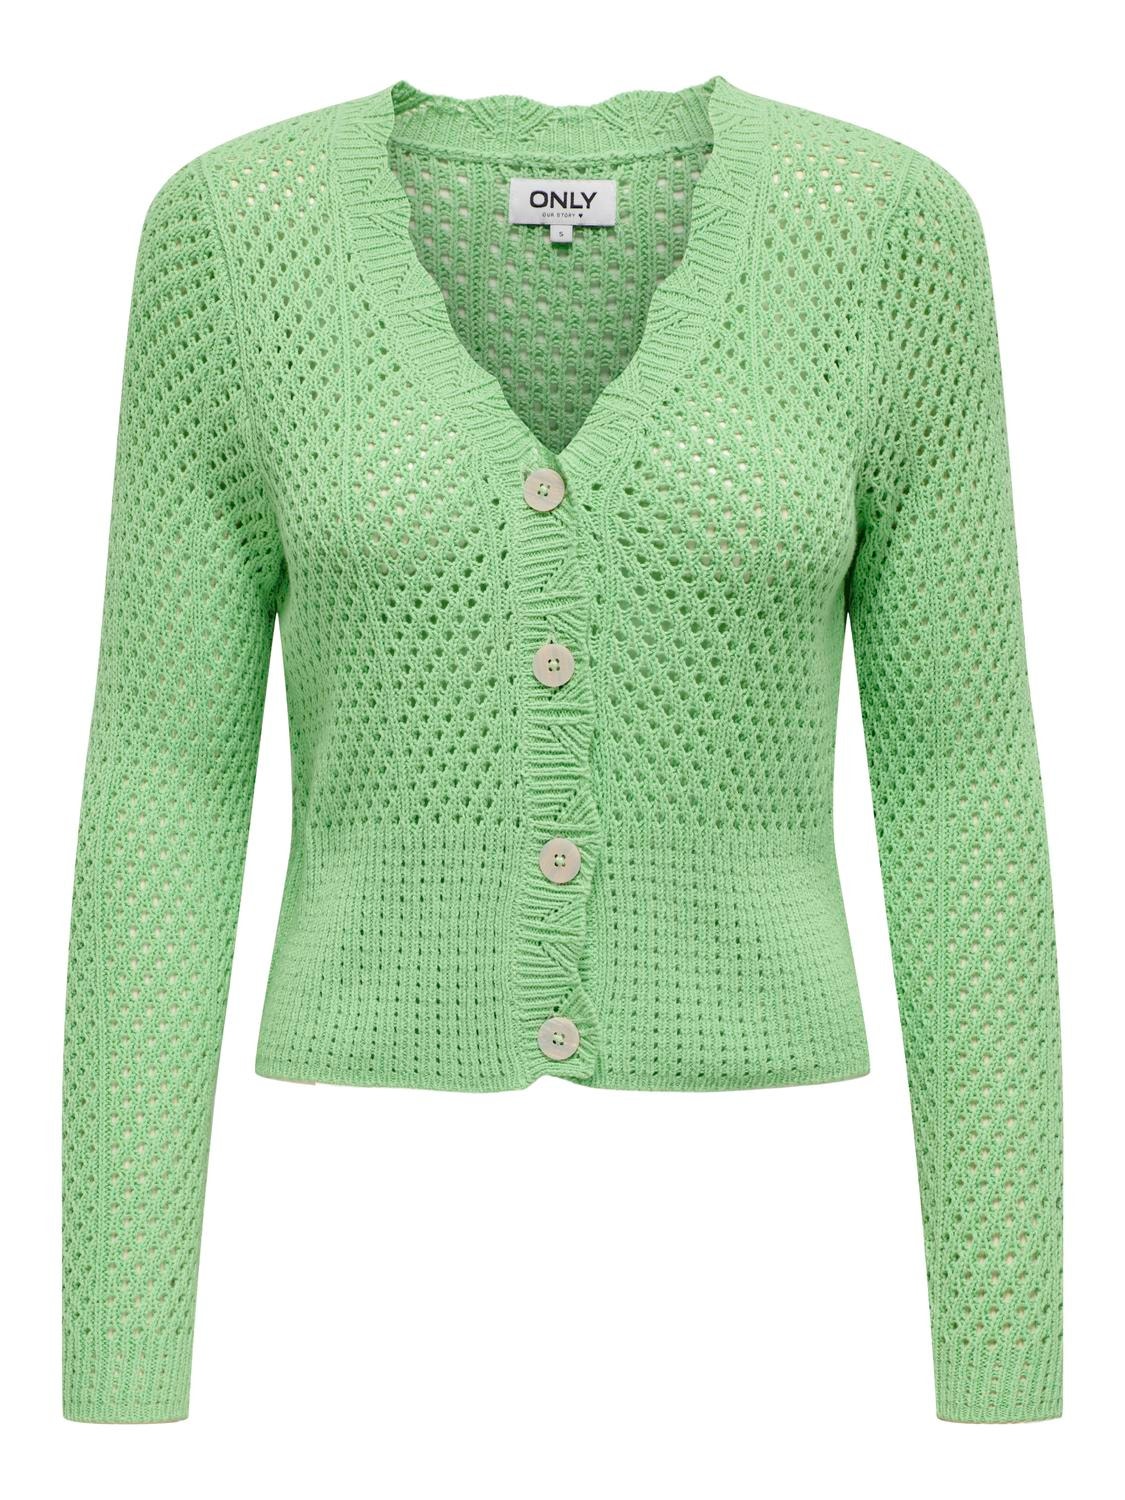 ONLY American Fit V-Neck Ribbed cuffs Knit Cardigan -Spring Bouquet - 15314647